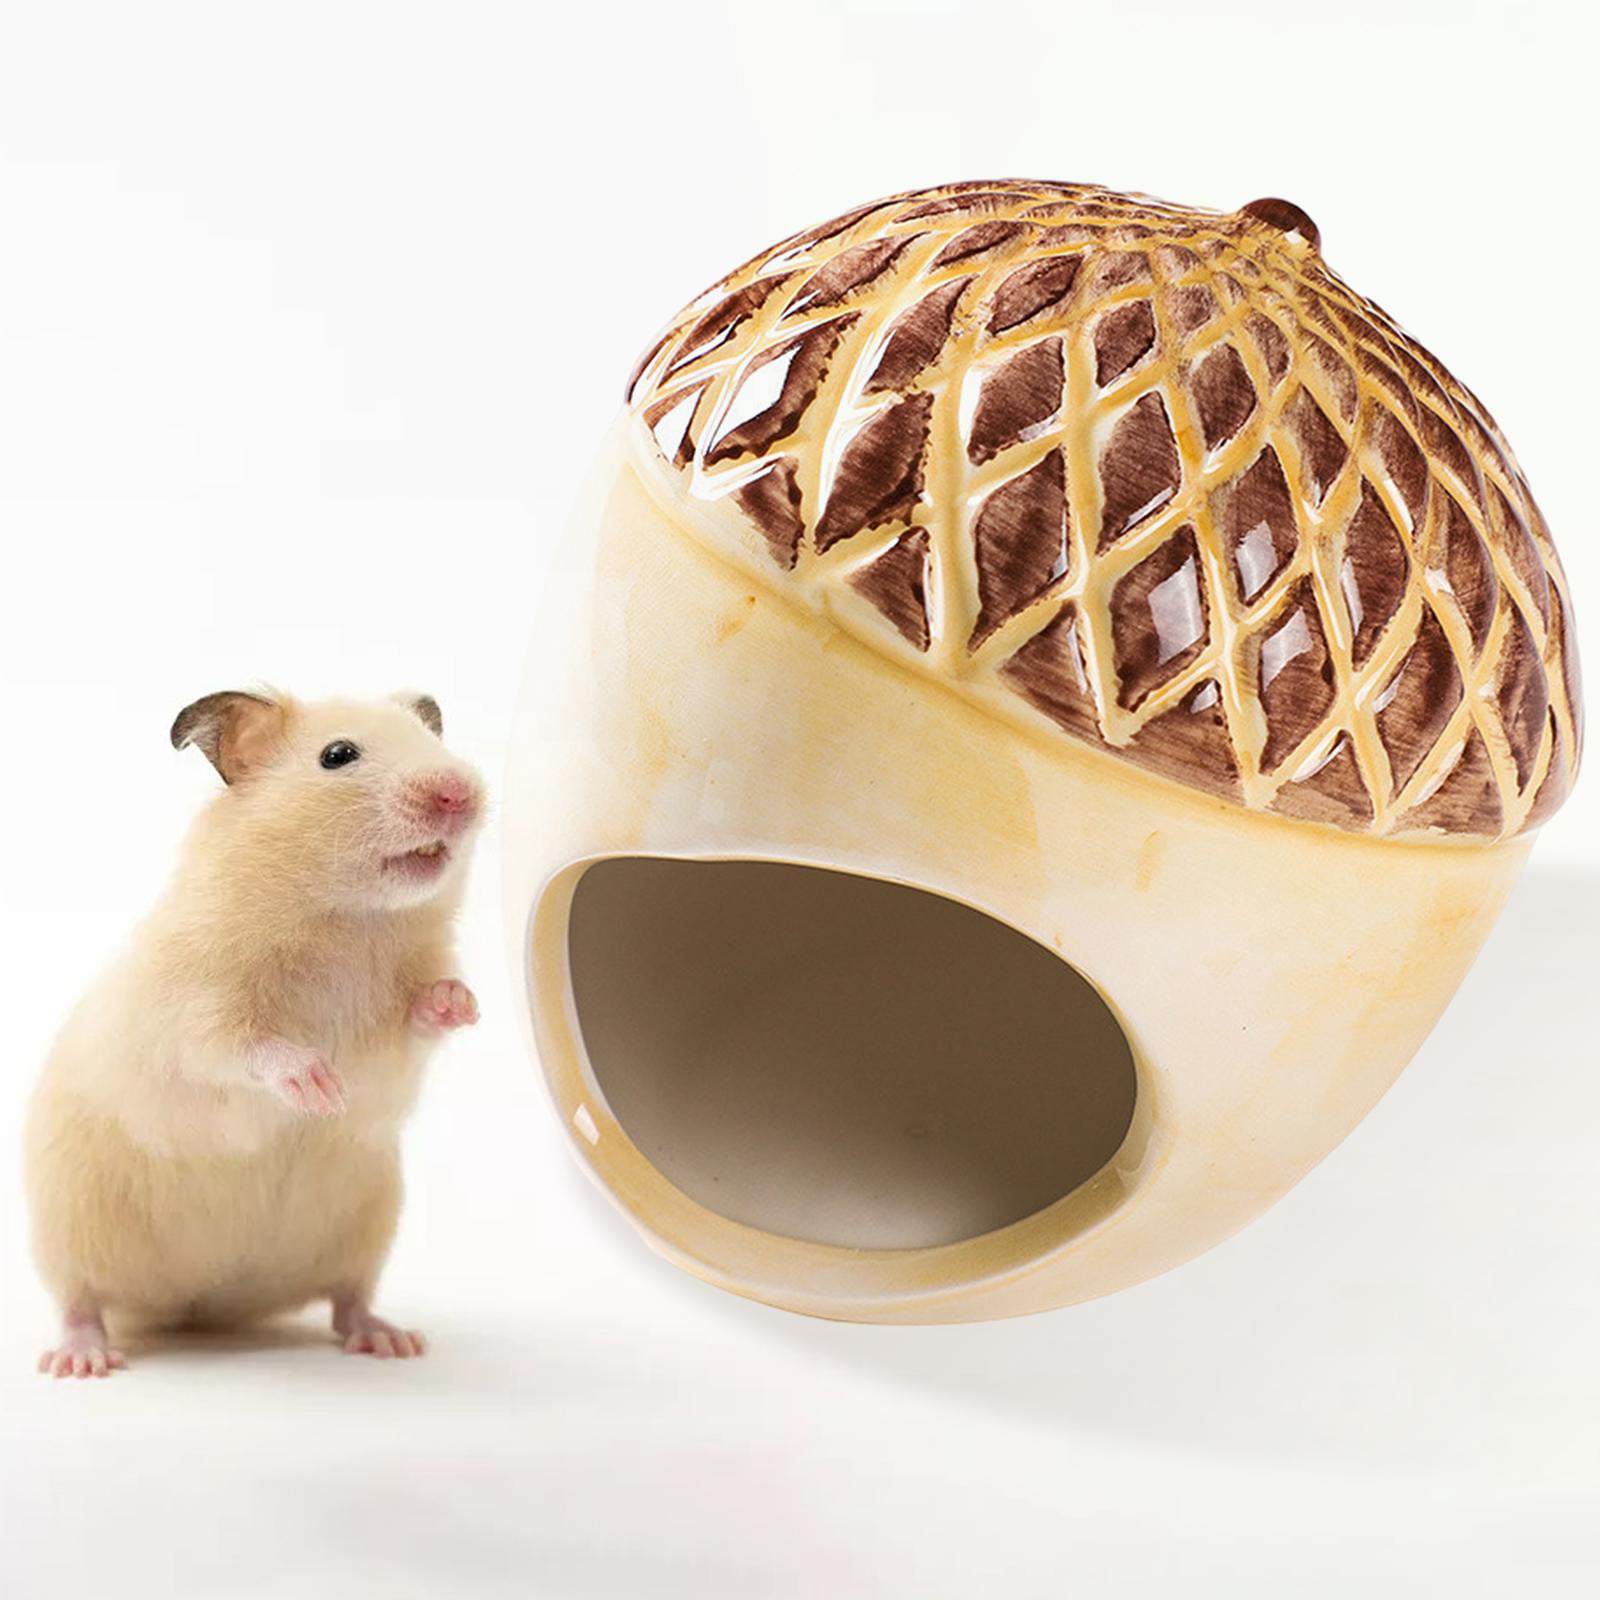 Ceramic Hideout Hut for Small Animals like Dwarf Hamster Mouse Mice Rat Gerbil 